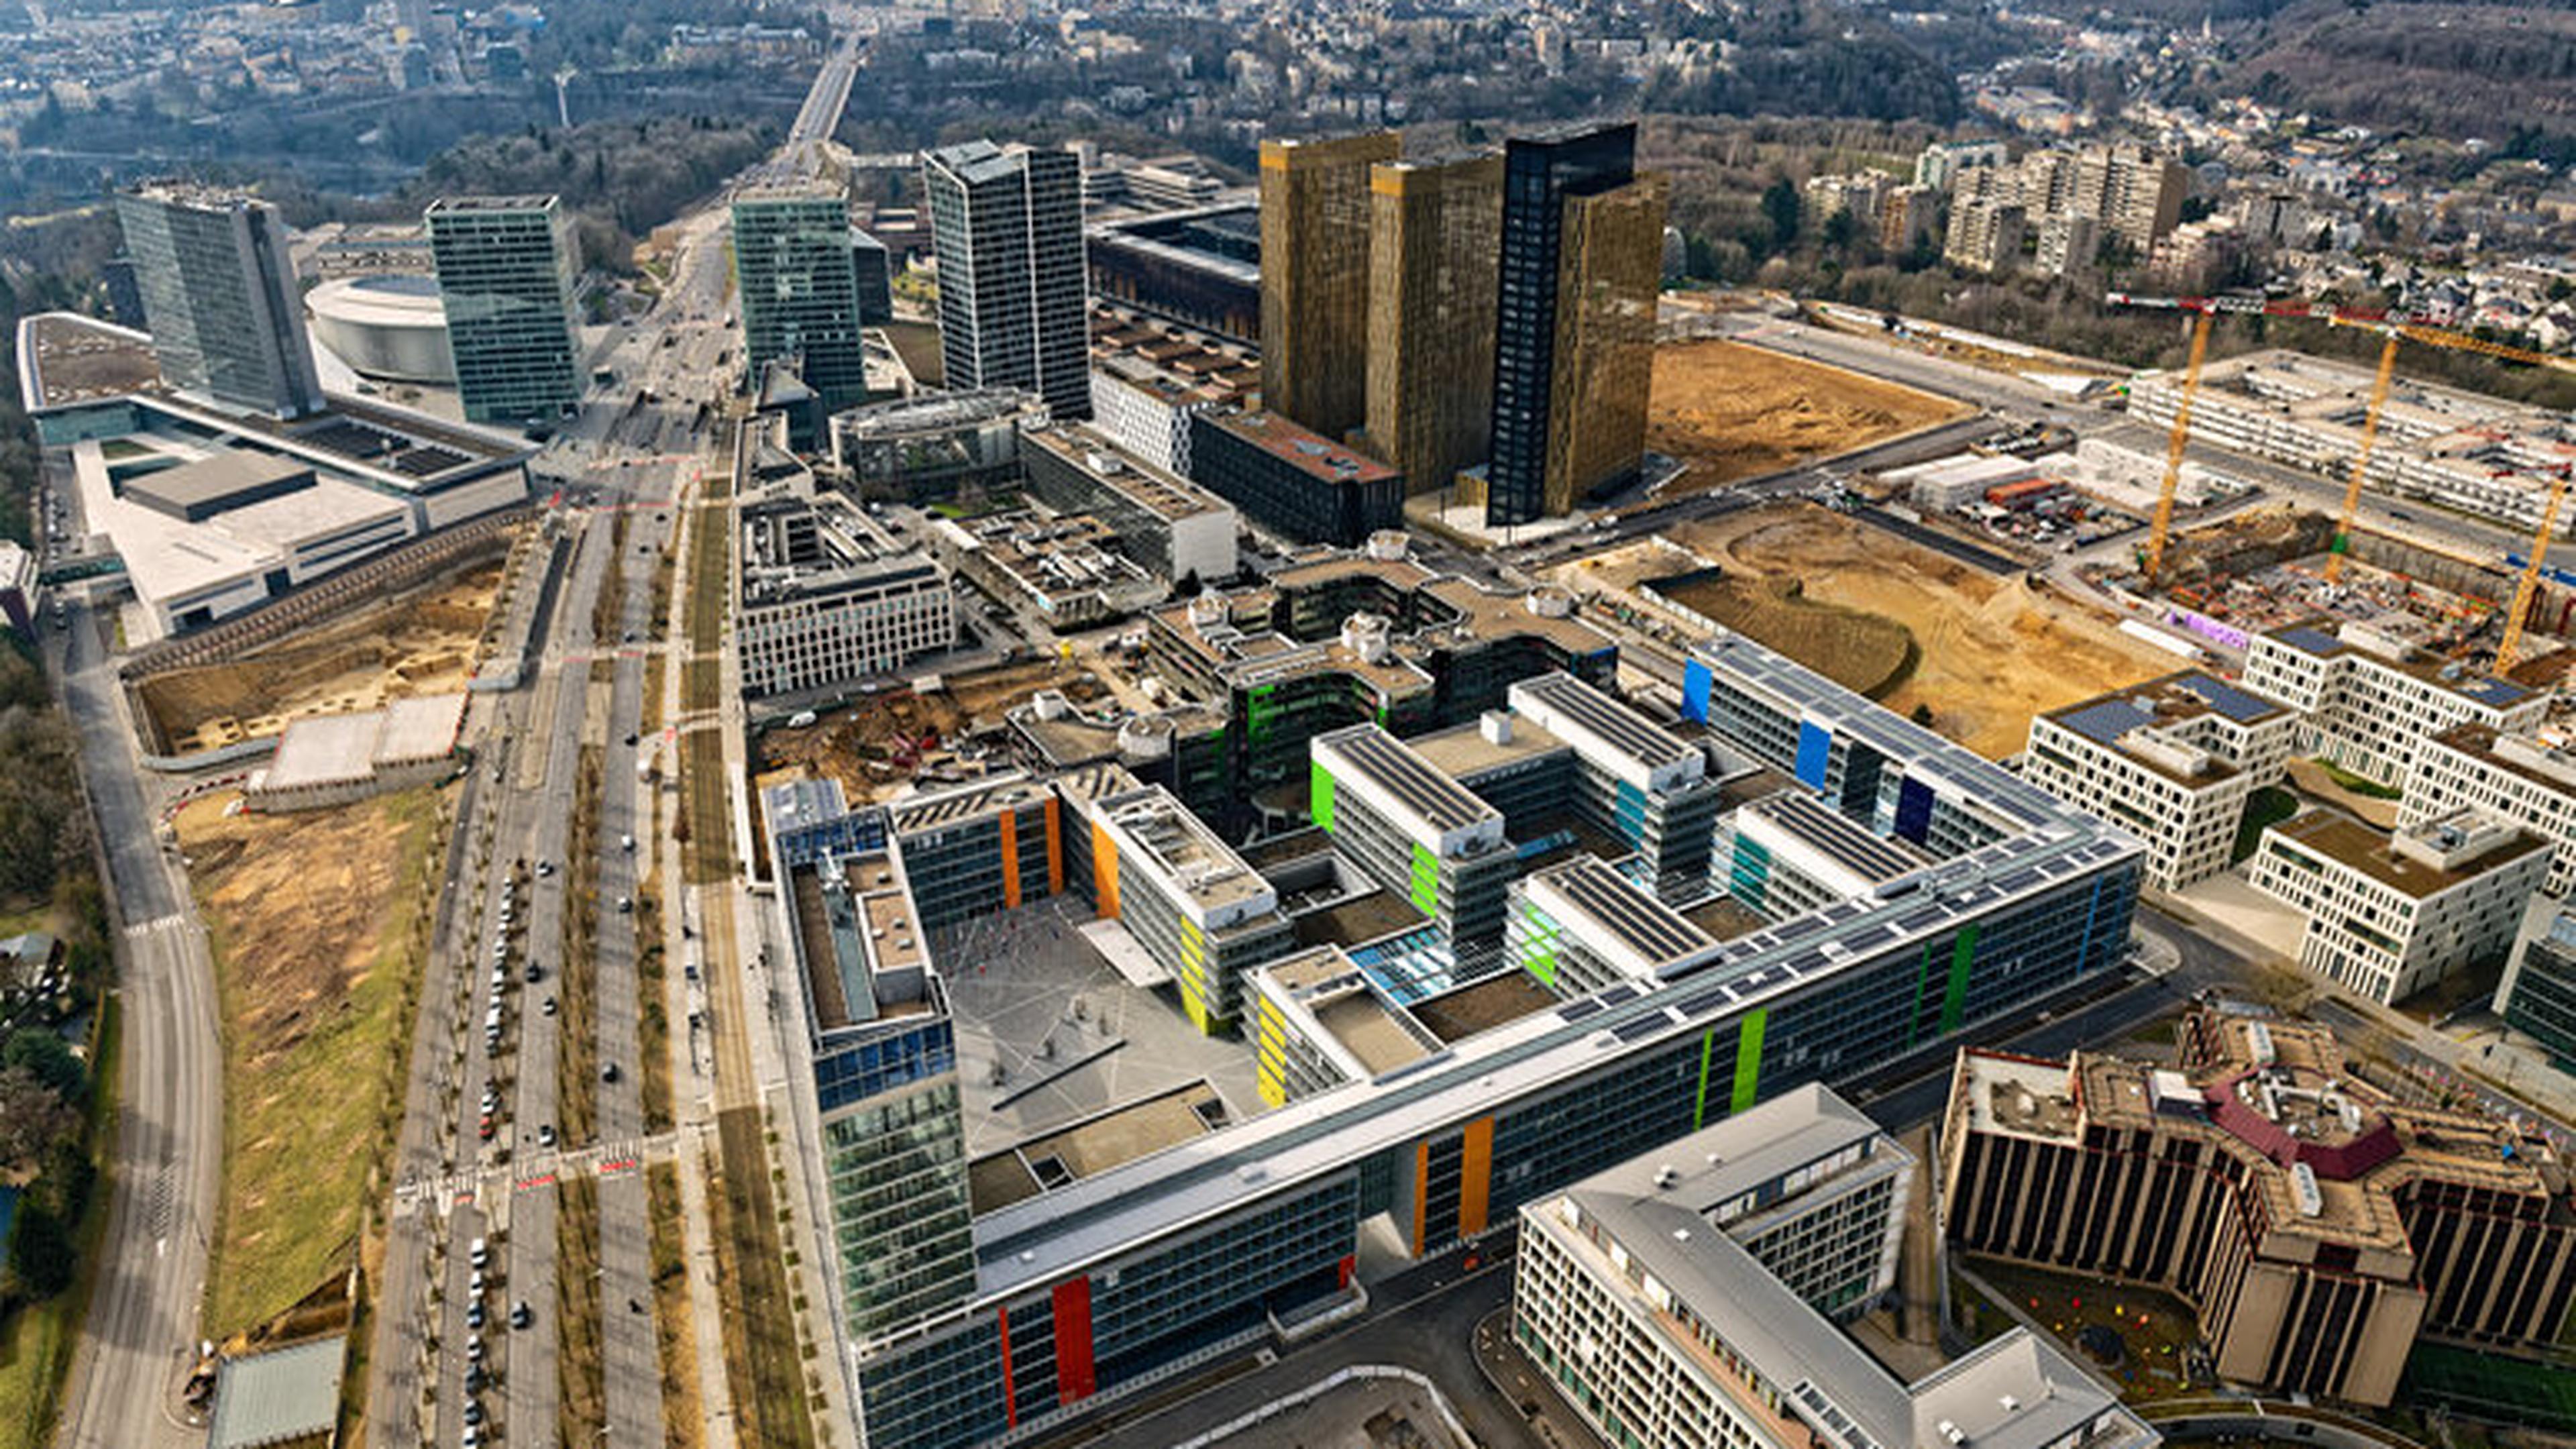 An aerial view of the European Parliament building in Kirchberg, surrounded by other EU institutions and agencies